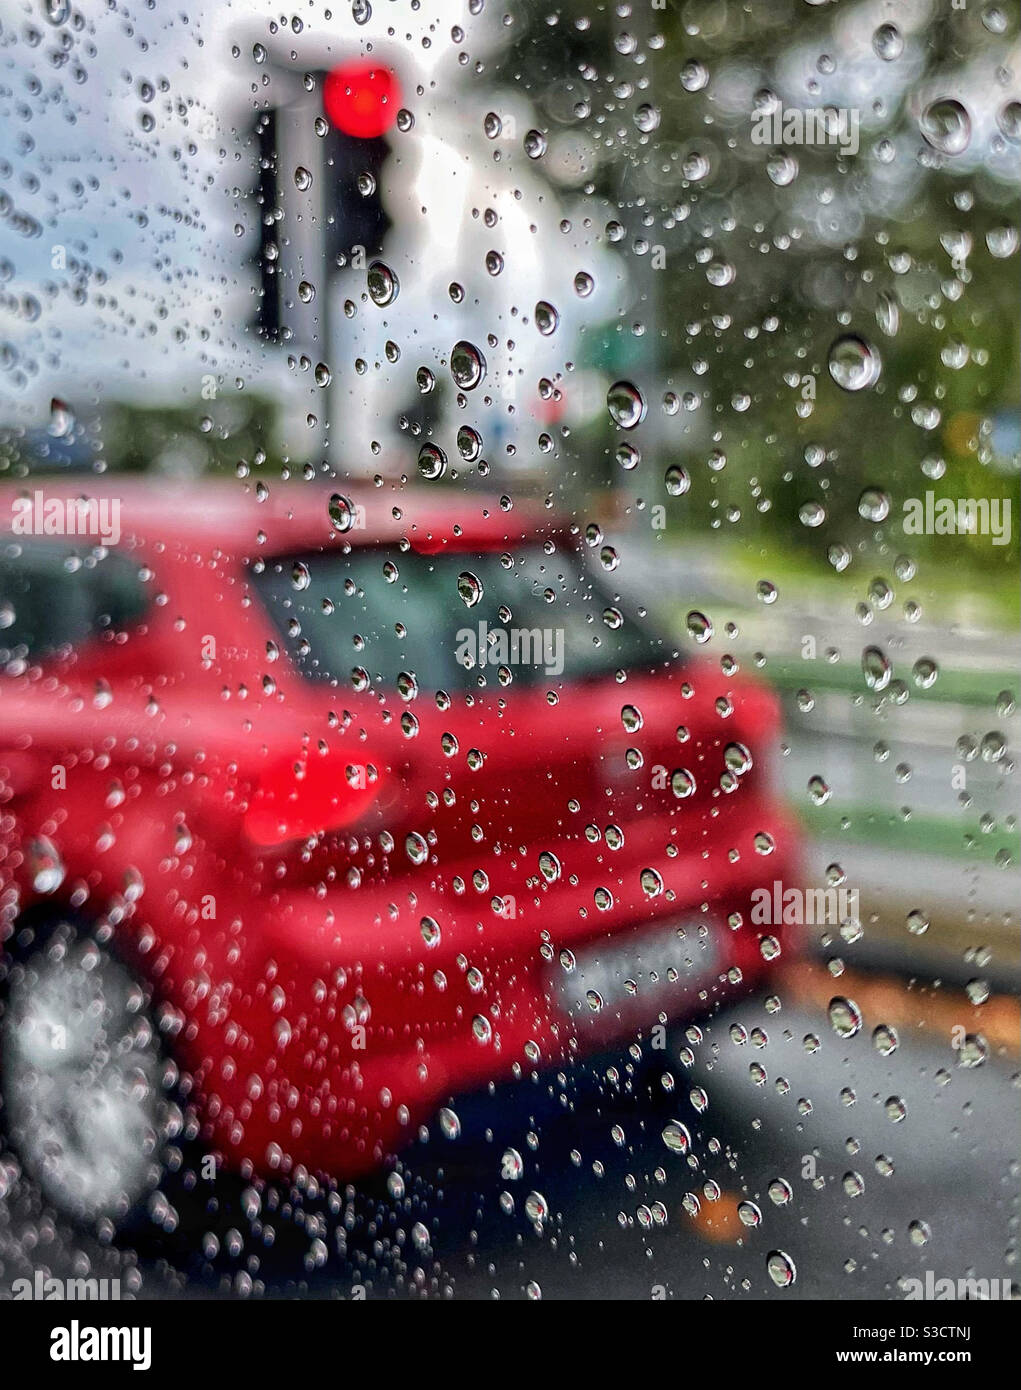 Red car at a red light on a rainy day Stock Photo